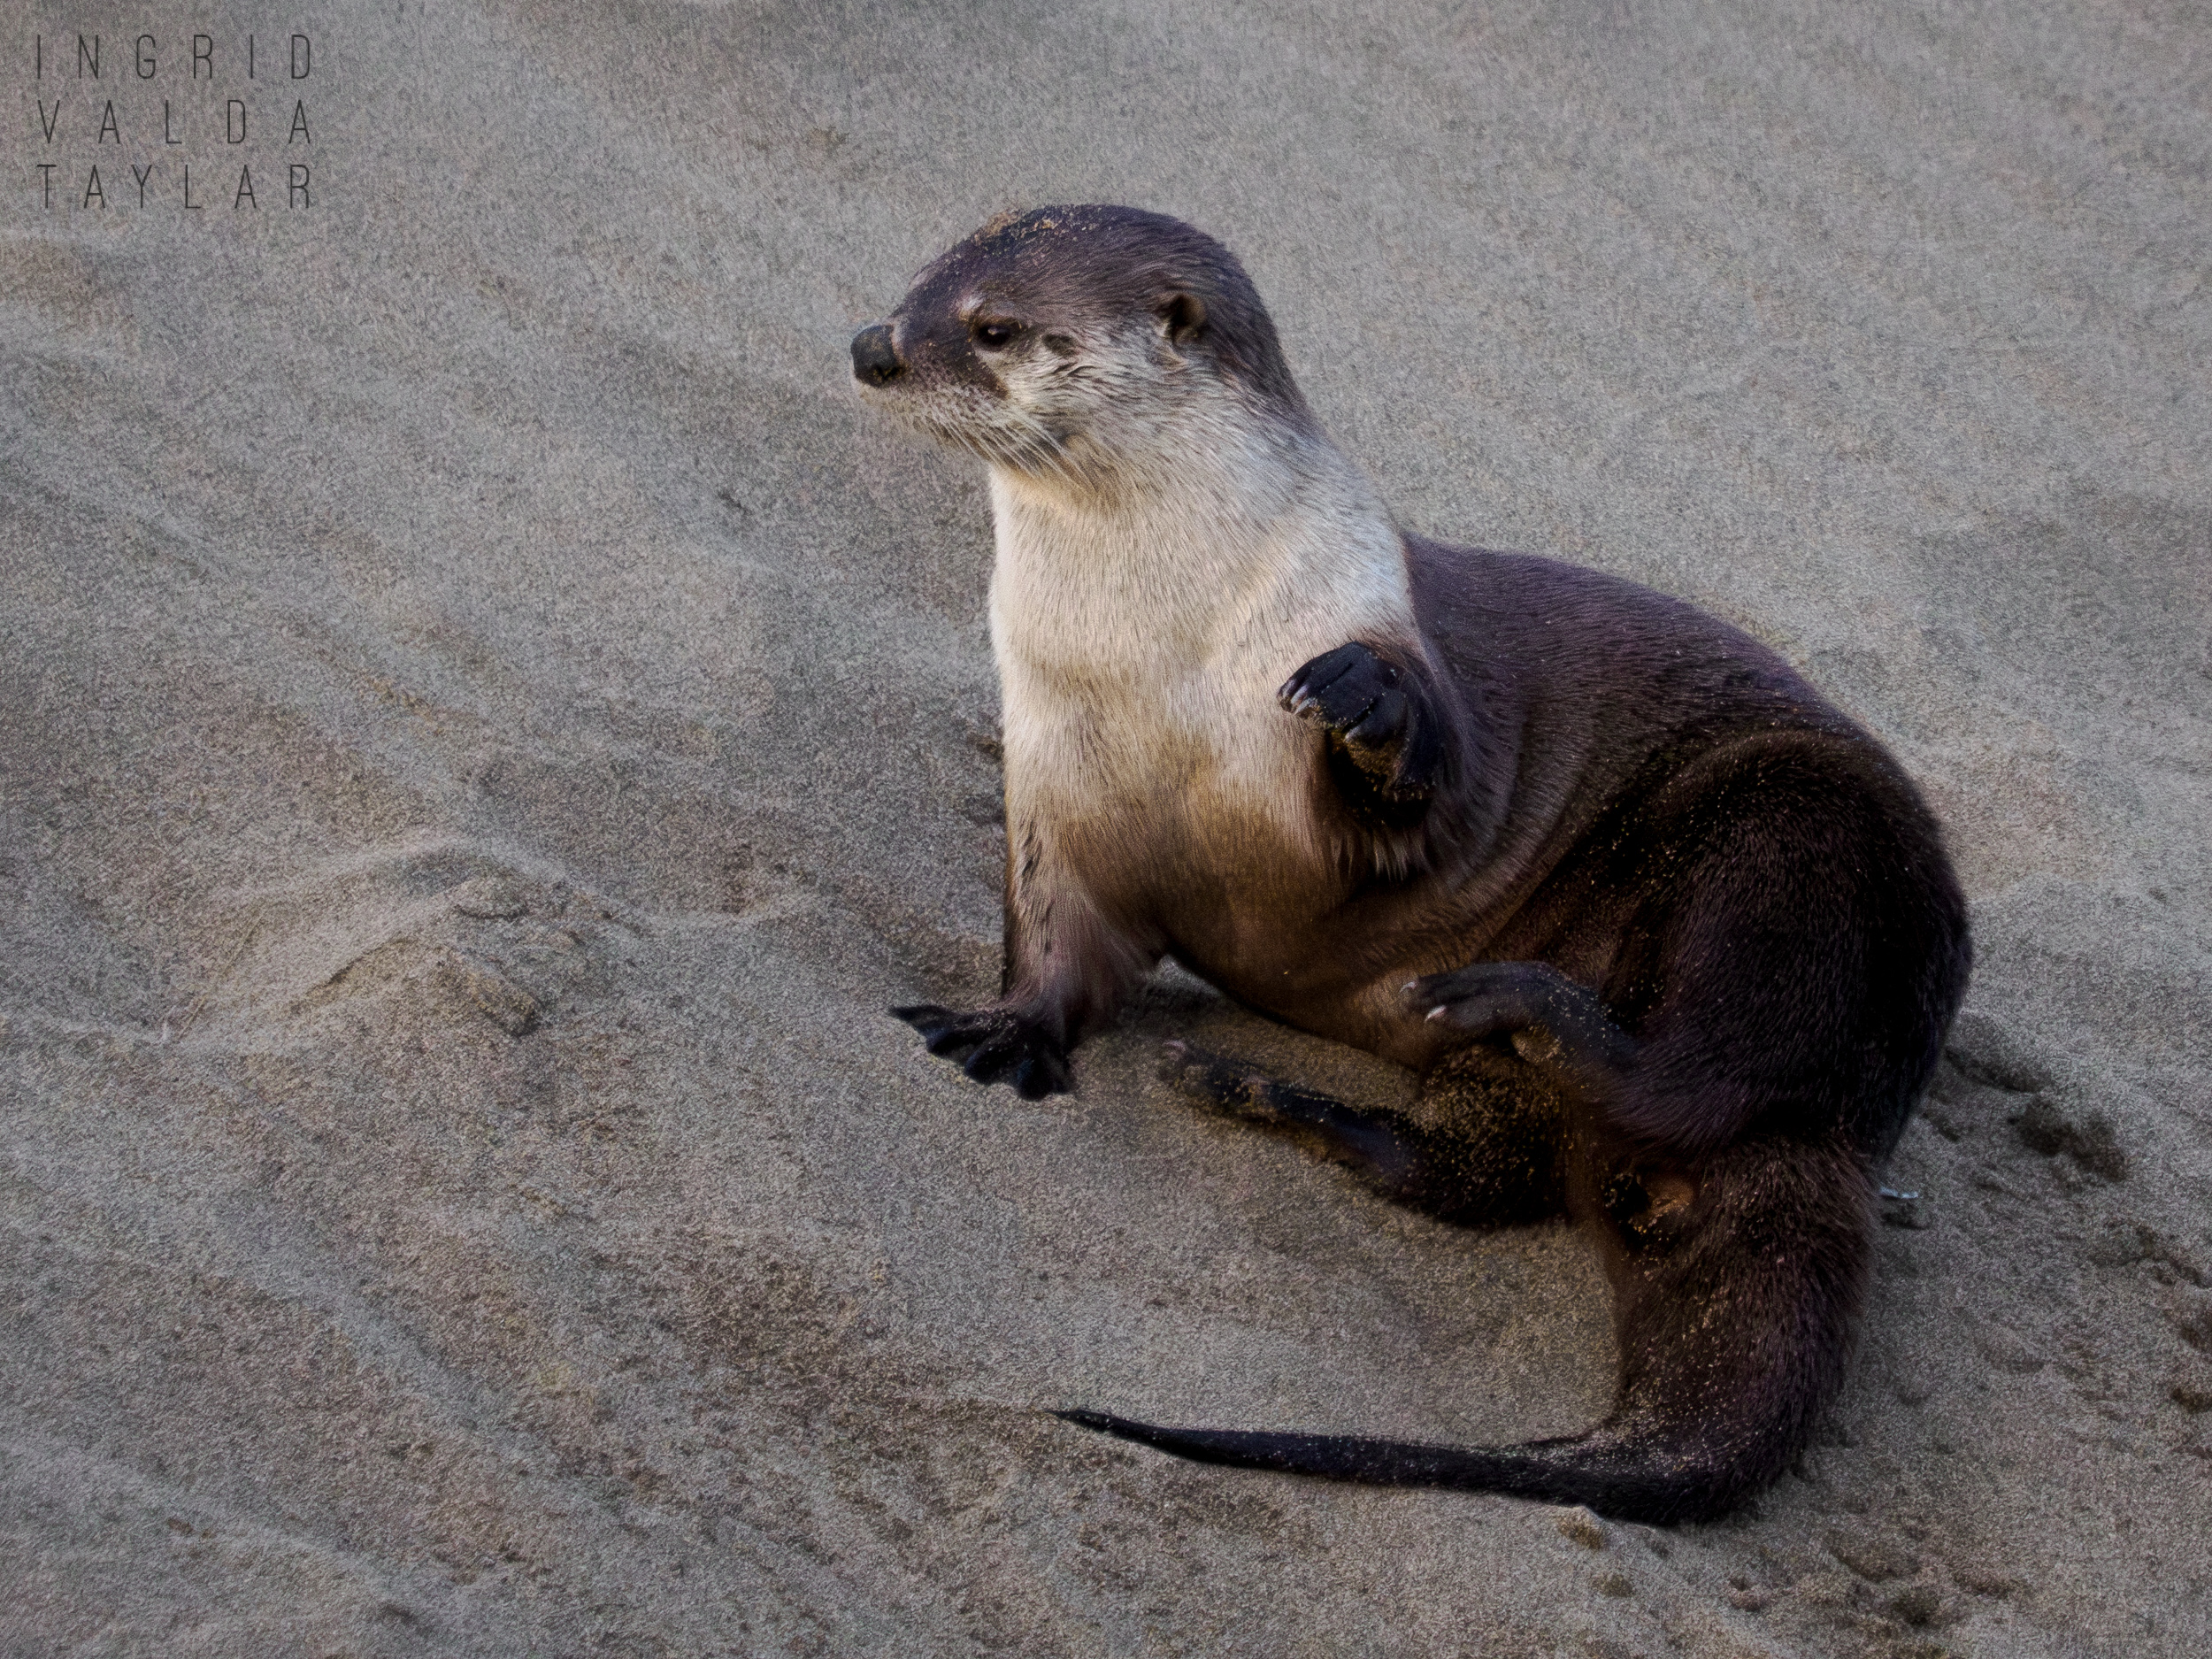 River Otter on Sand Bank in Point Reyes